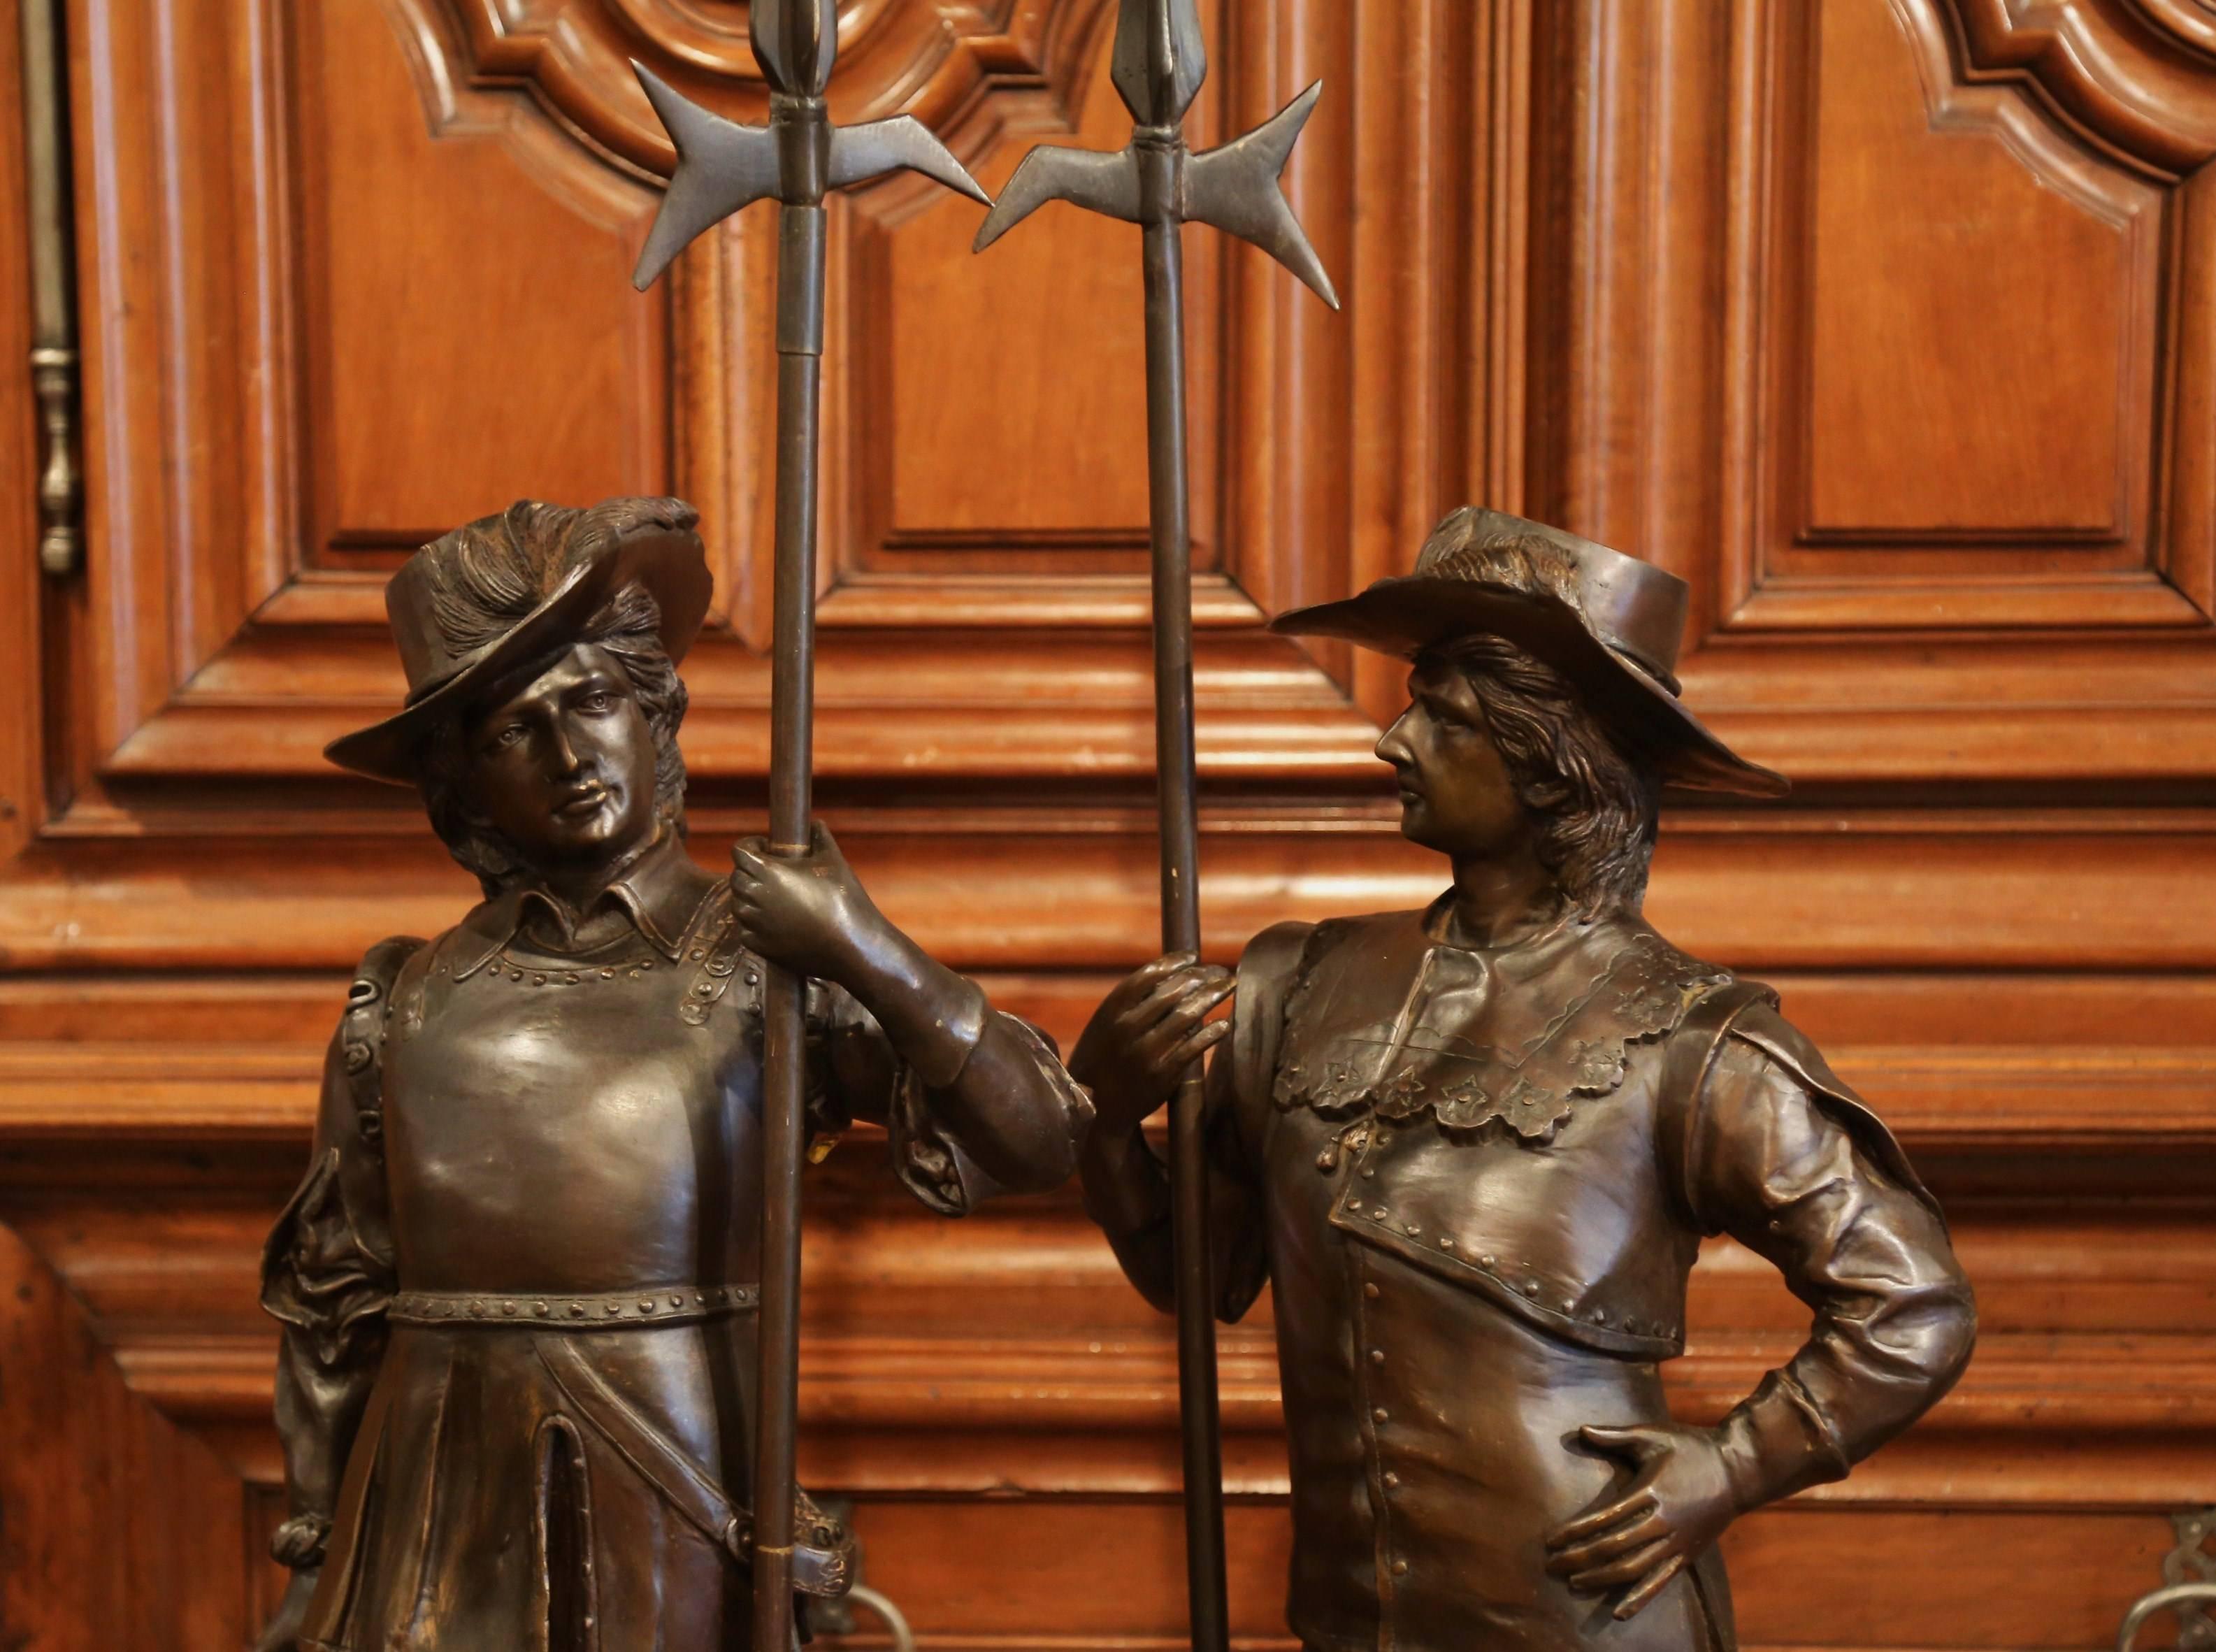 Renaissance Pair of 19th Century French Patinated Musketeers Sculptures Signed E. Picault